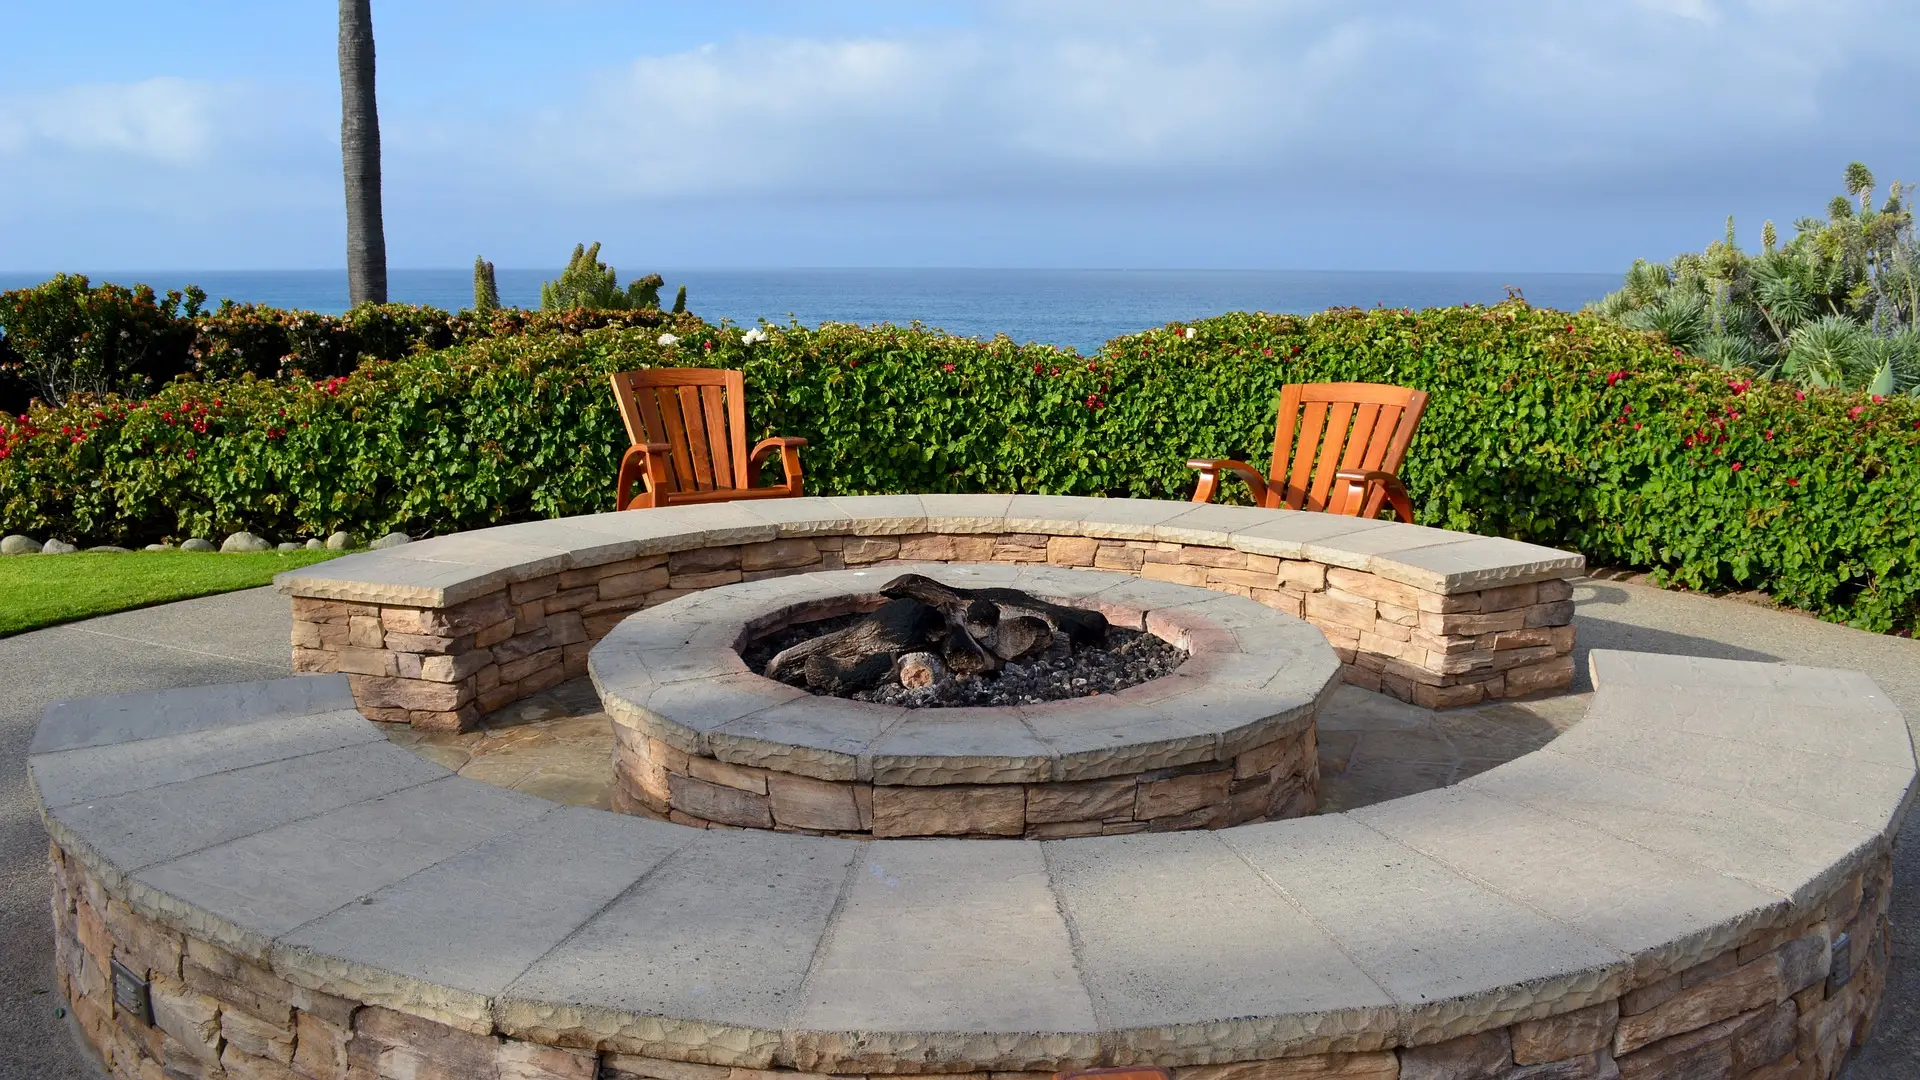 Can You Put A Fire Pit On Concrete, How To Make A Fire Pit On Concrete Slab